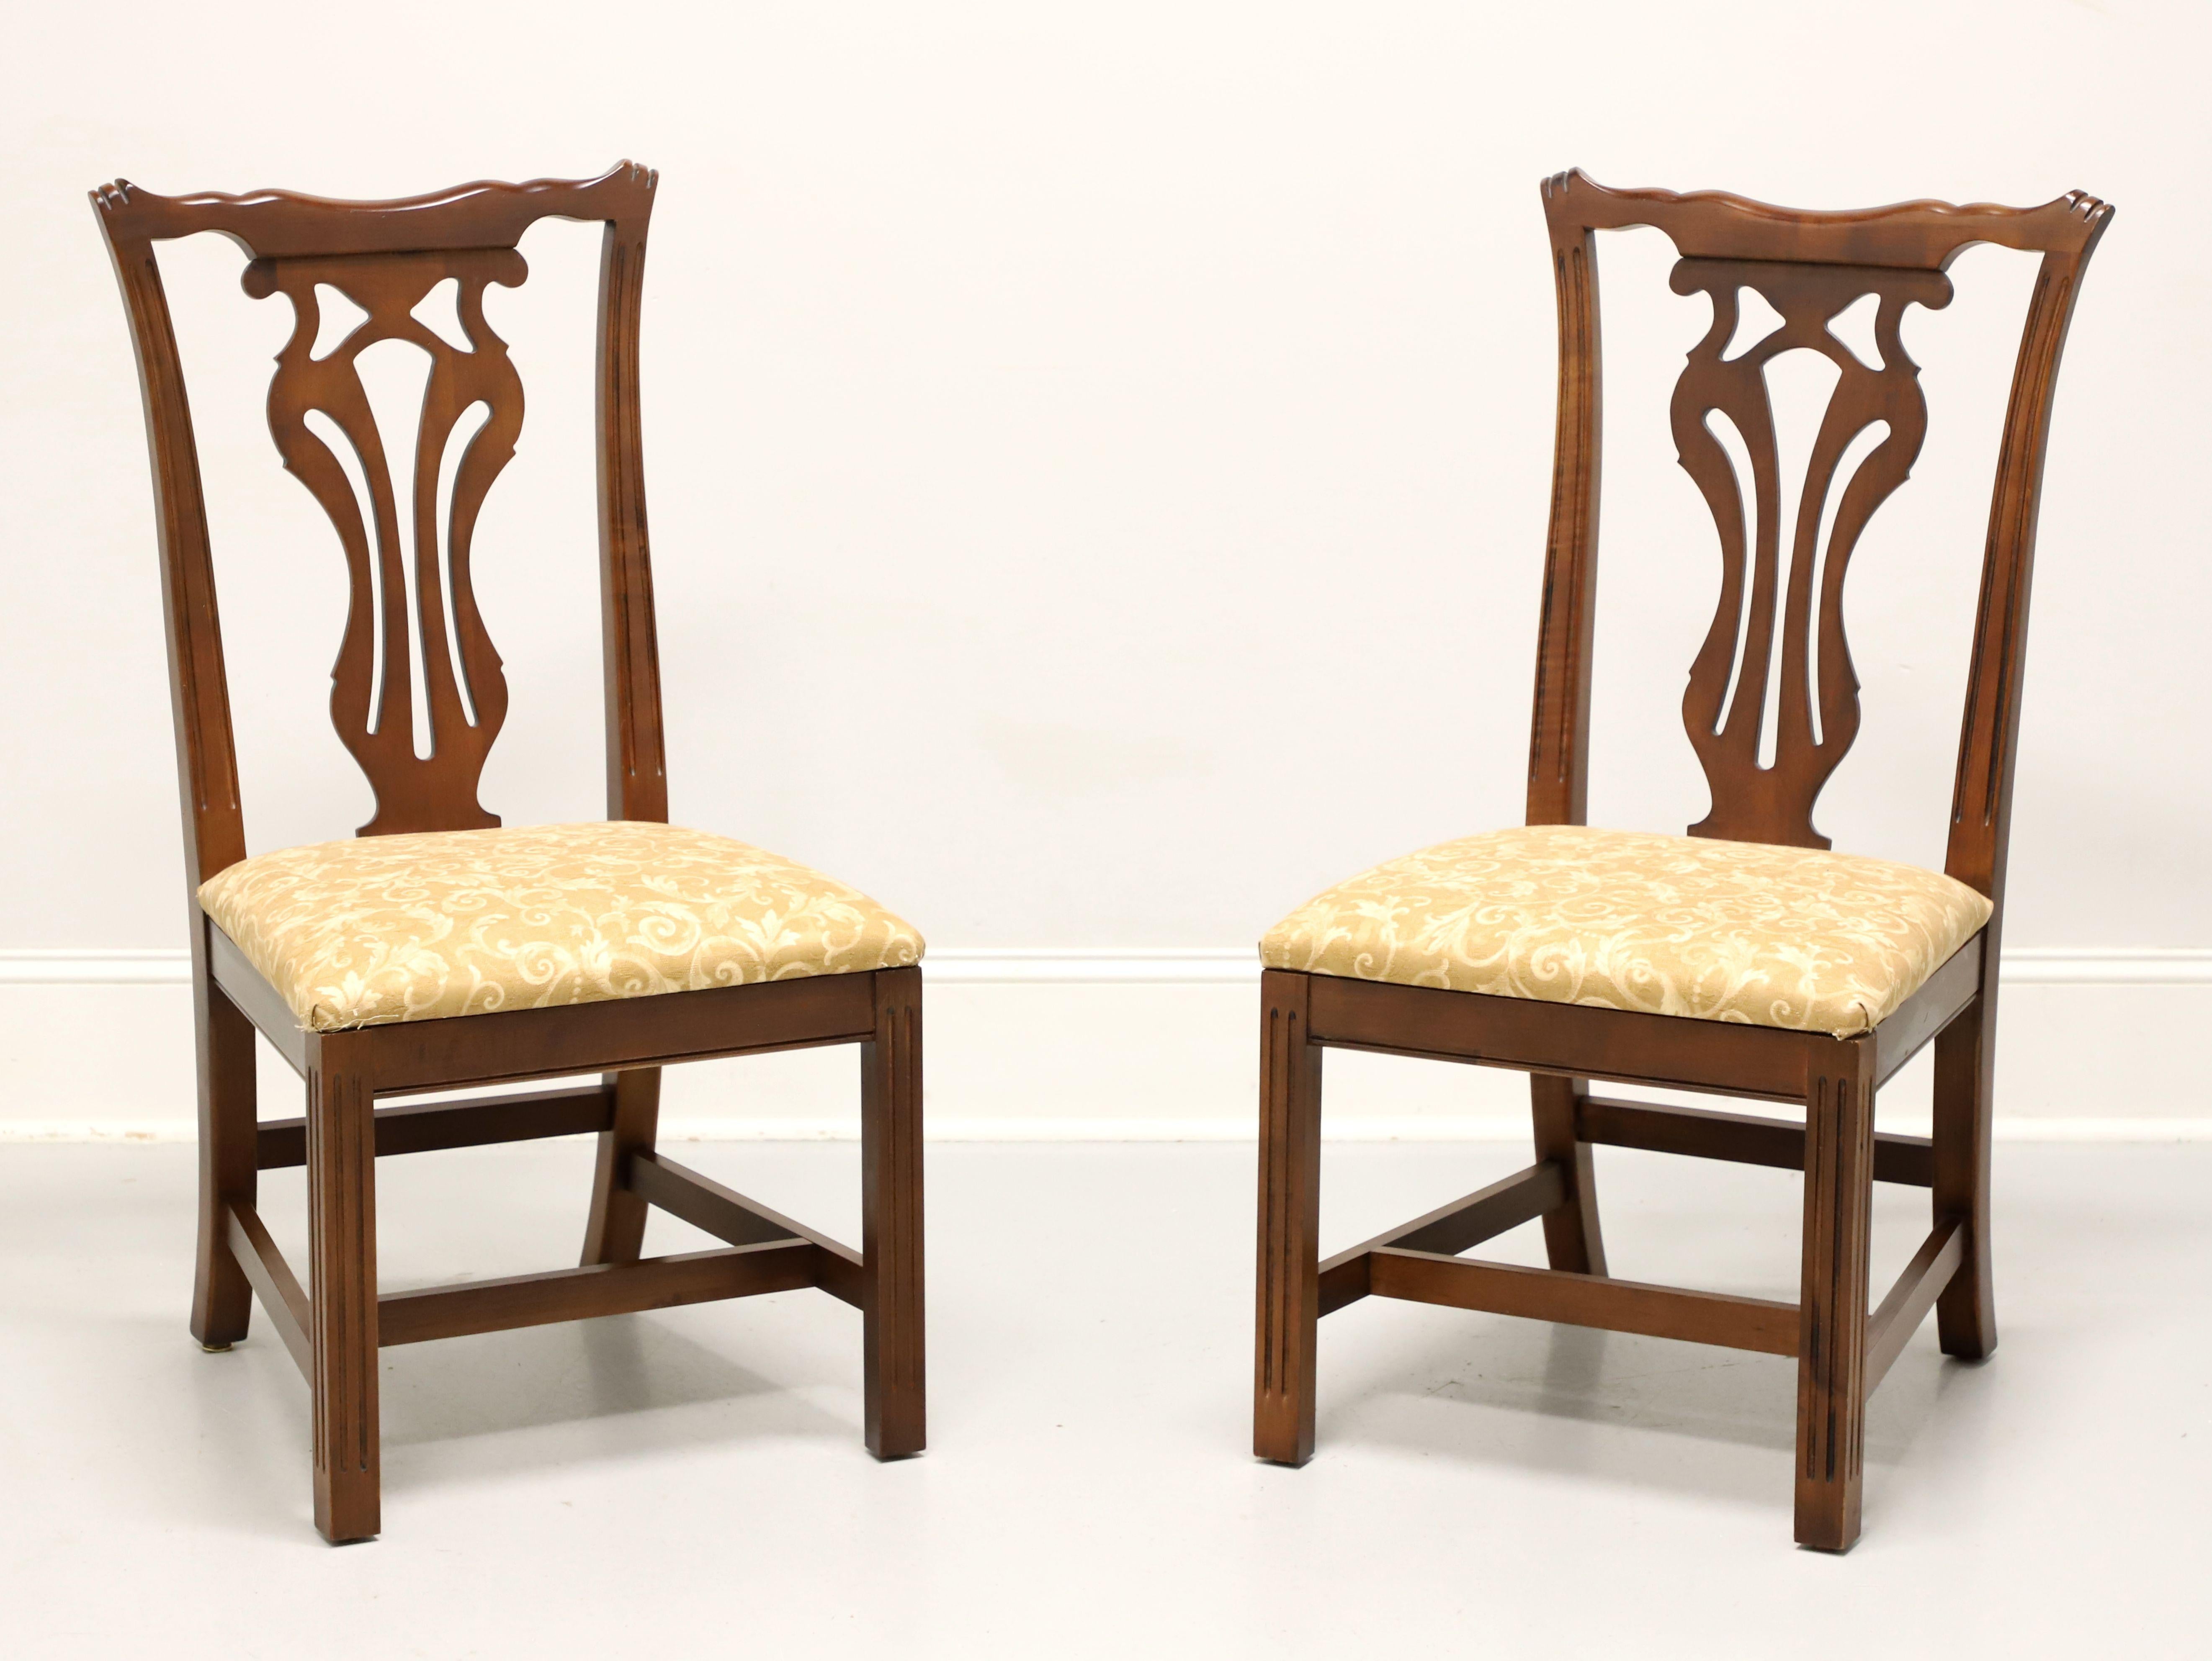 KNOB CREEK Mahogany Chippendale Dining Side Chairs - Pair C For Sale 5